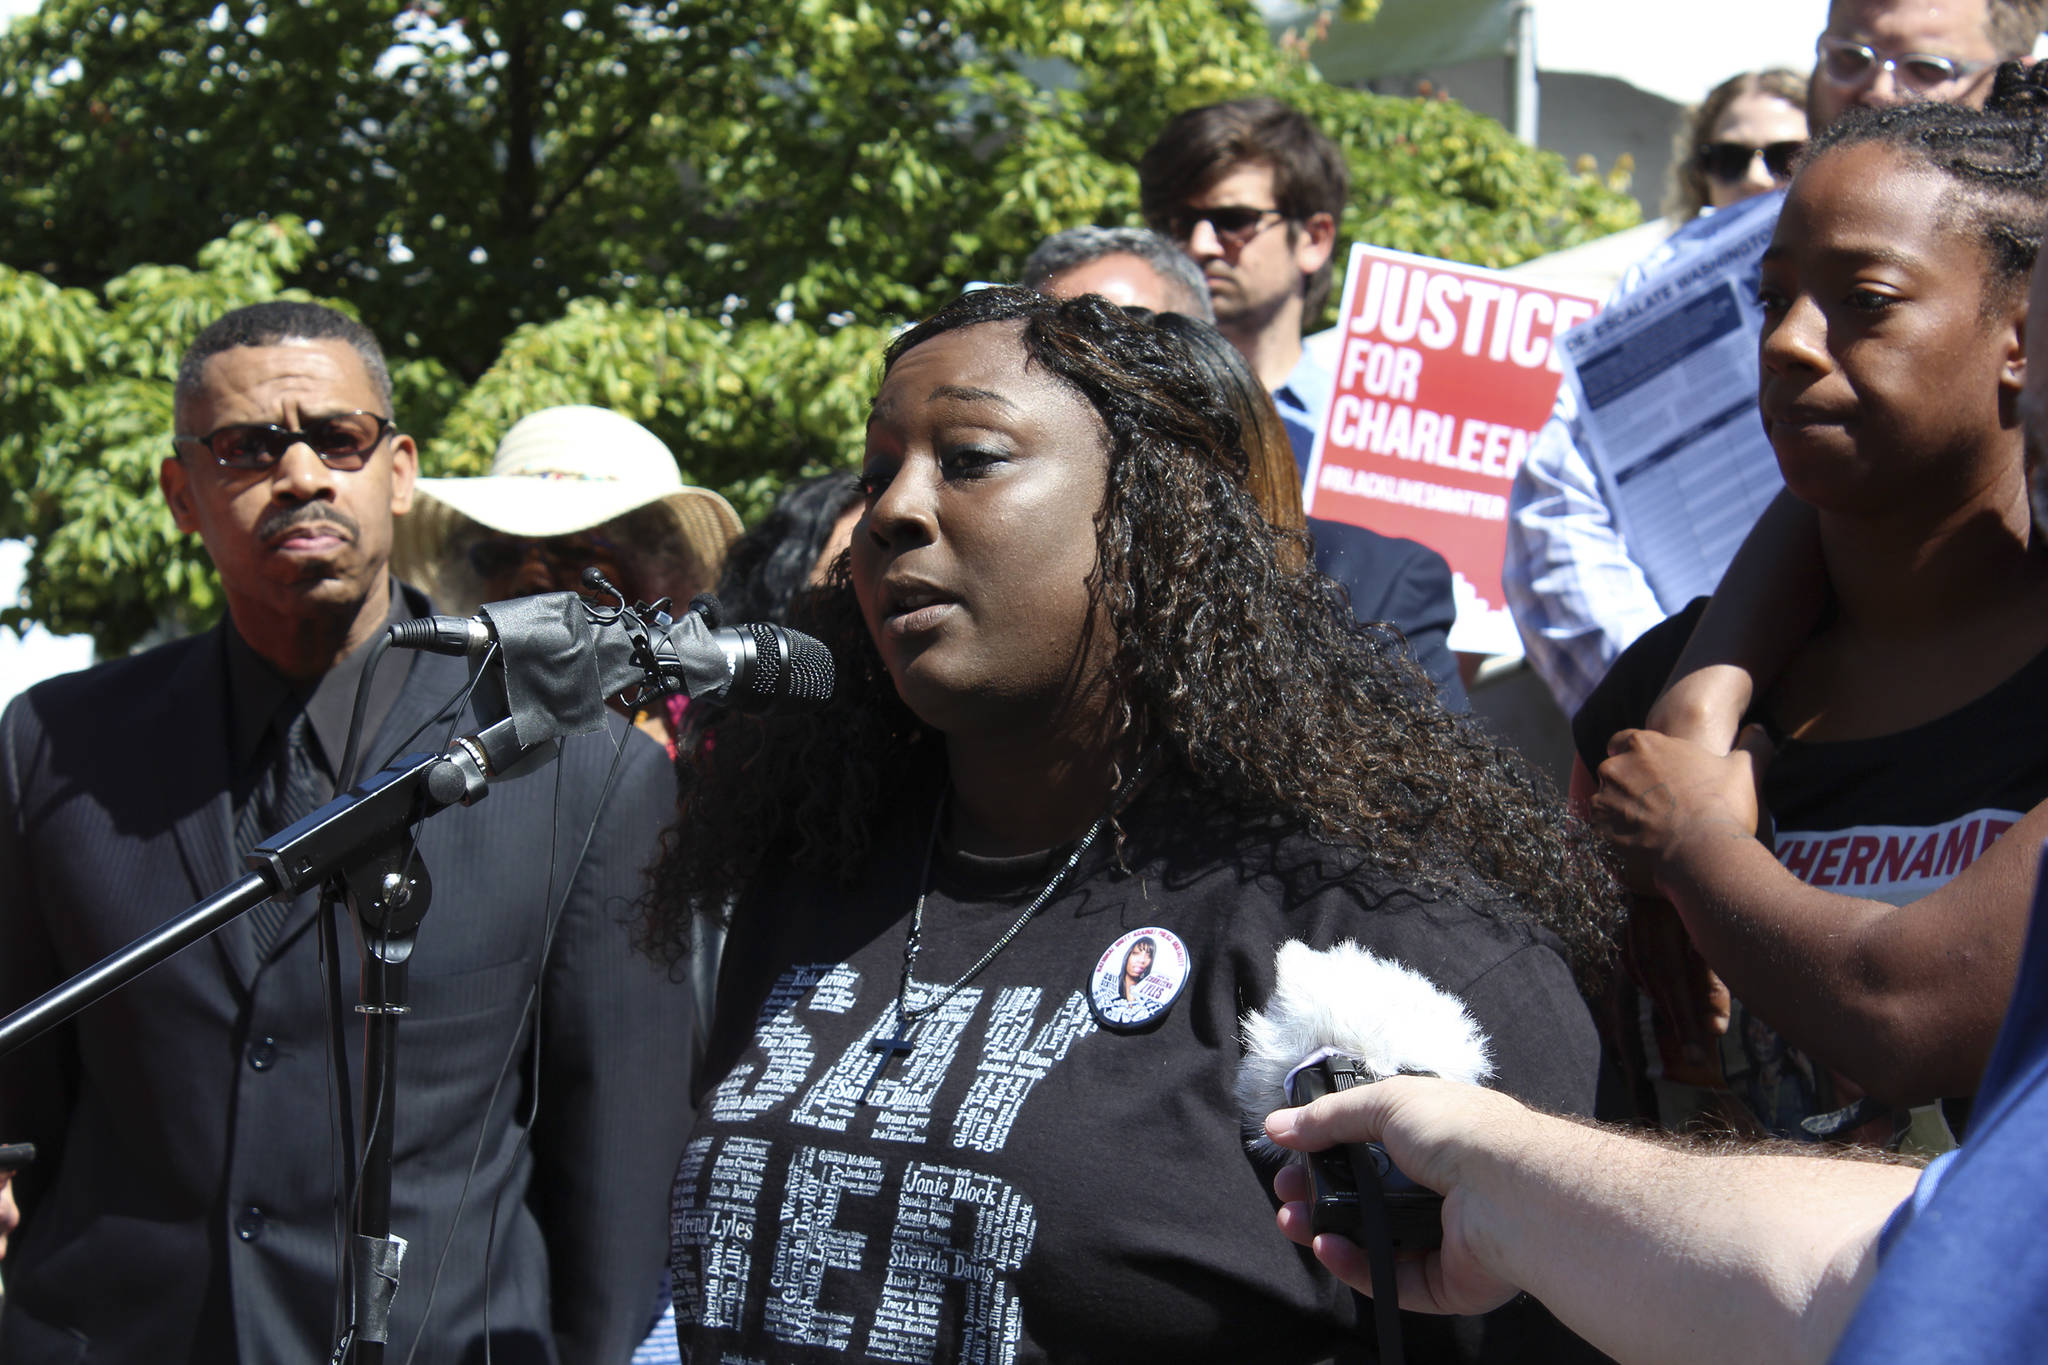 Katrina Johnson, Charleena Lyles’ cousin, supports offering legal assistance to families involved in police shooting deaths. Photo by Sara Bernard